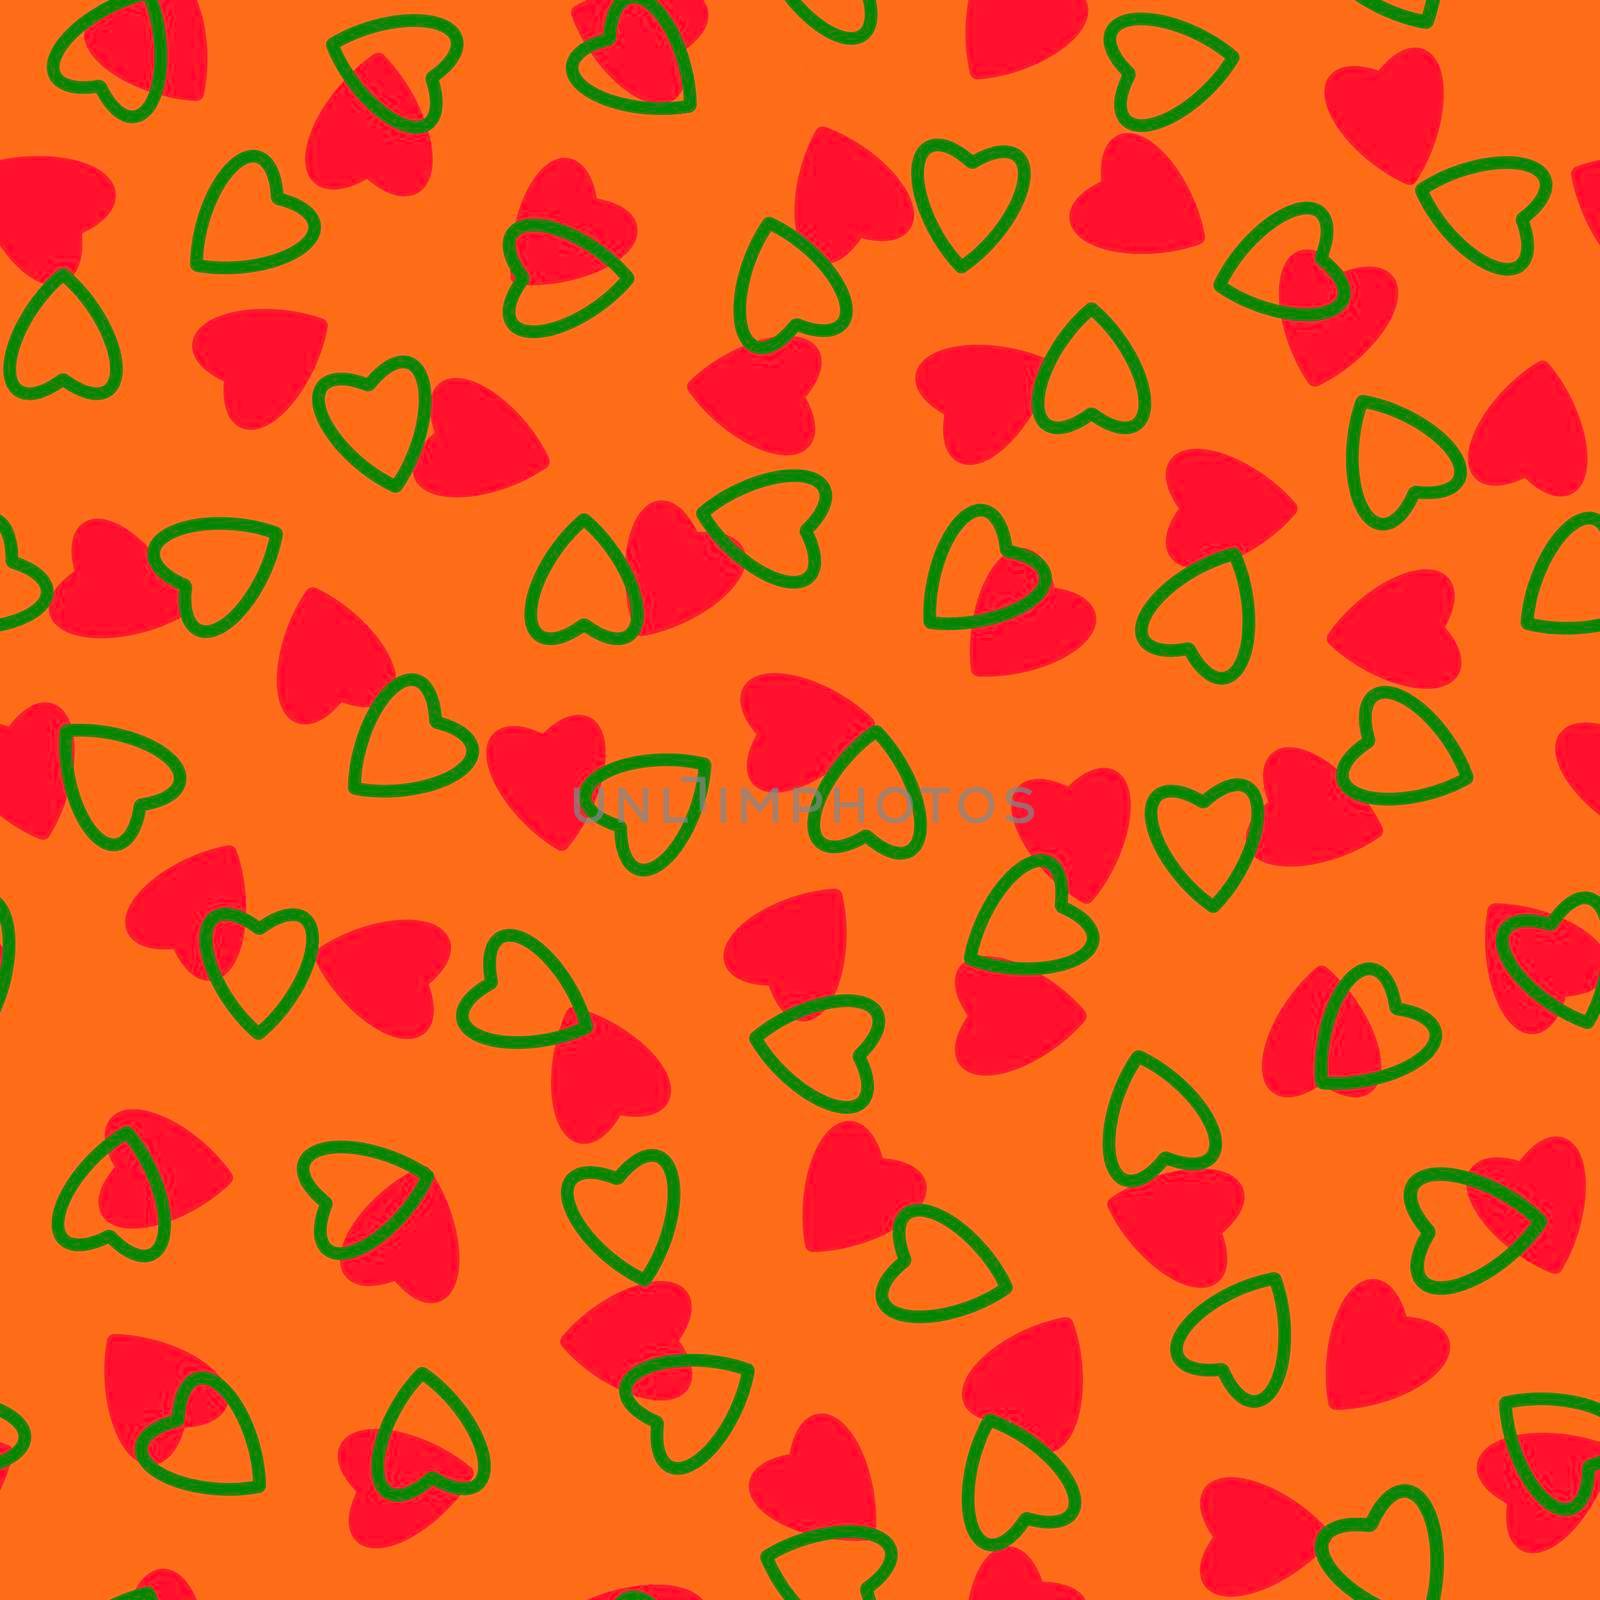 Simple hearts seamless pattern,endless chaotic texture made of tiny heart silhouettes.Valentines,mothers day background.Red,orange,green.Great for Easter,wedding,scrapbook,gift wrapping paper,textiles